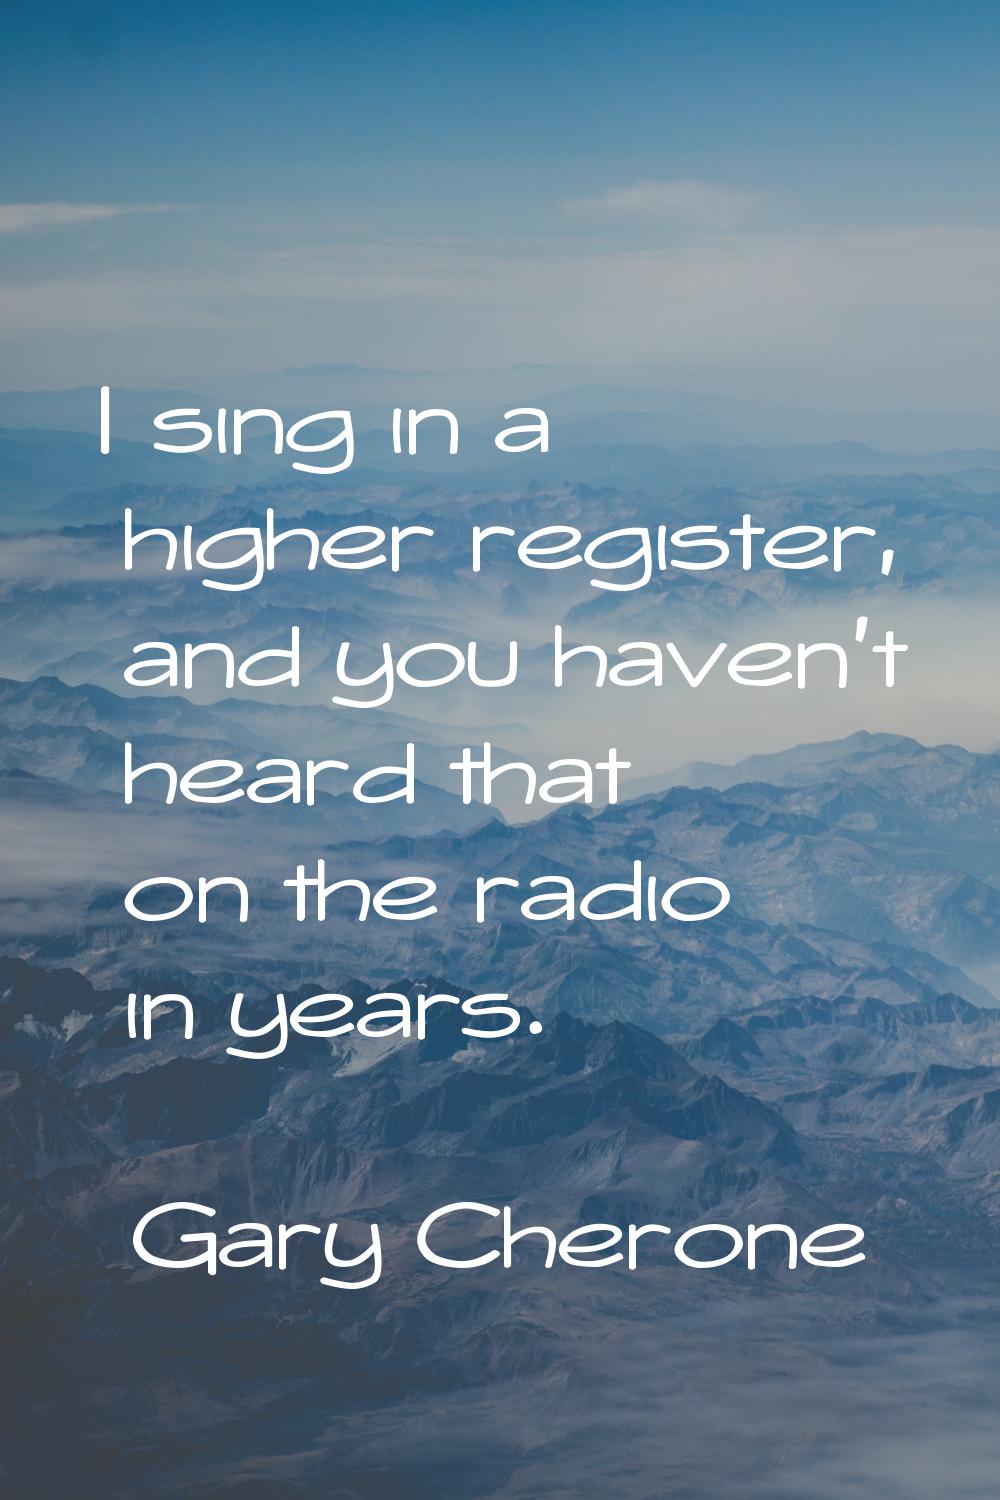 I sing in a higher register, and you haven't heard that on the radio in years.